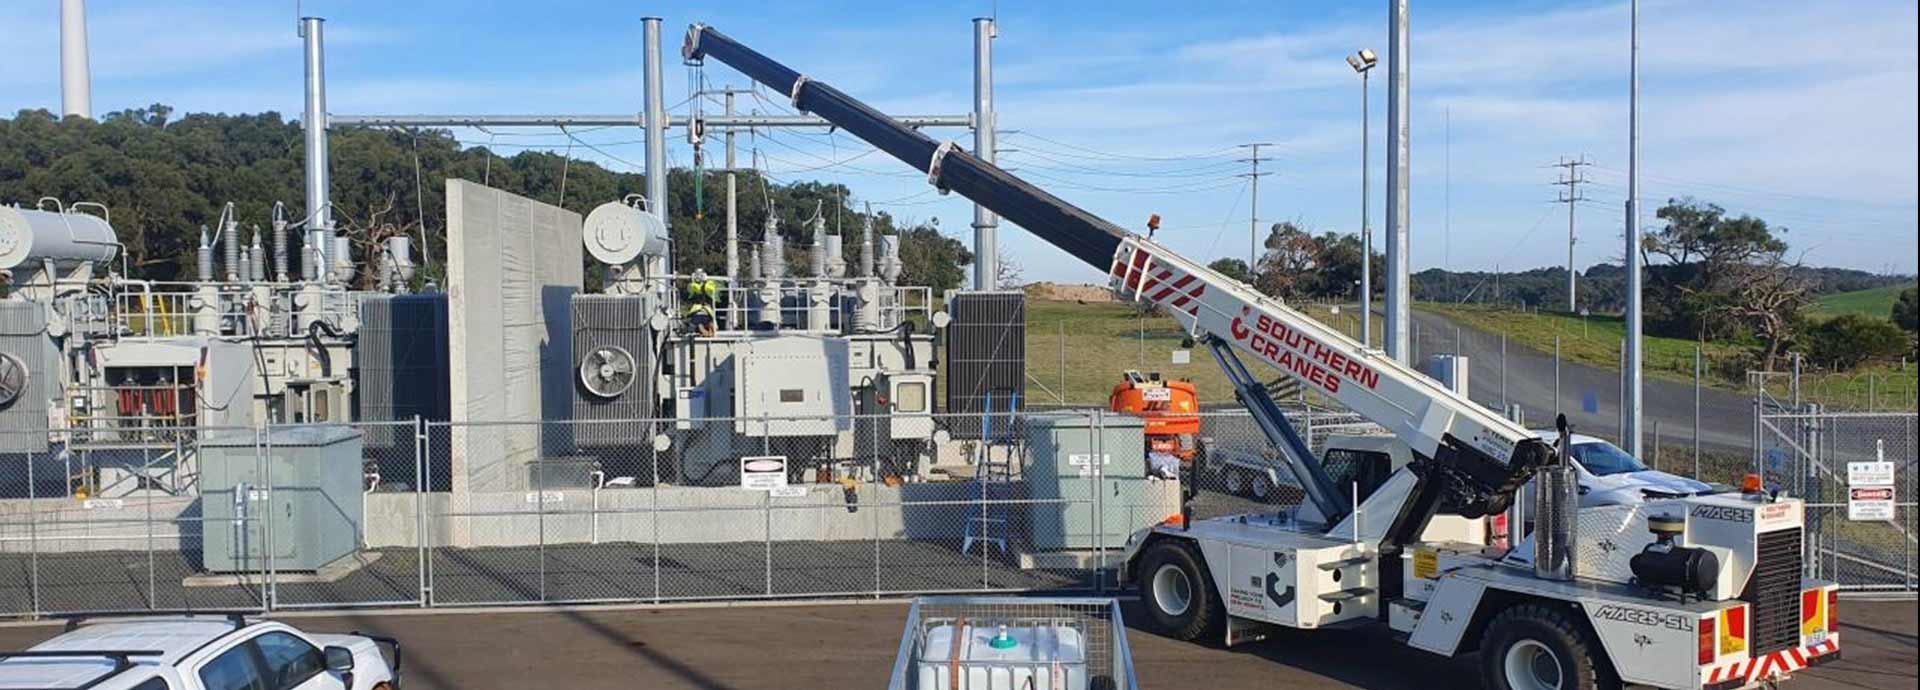 High Voltage Services in NSW, VIC, QLD, SA